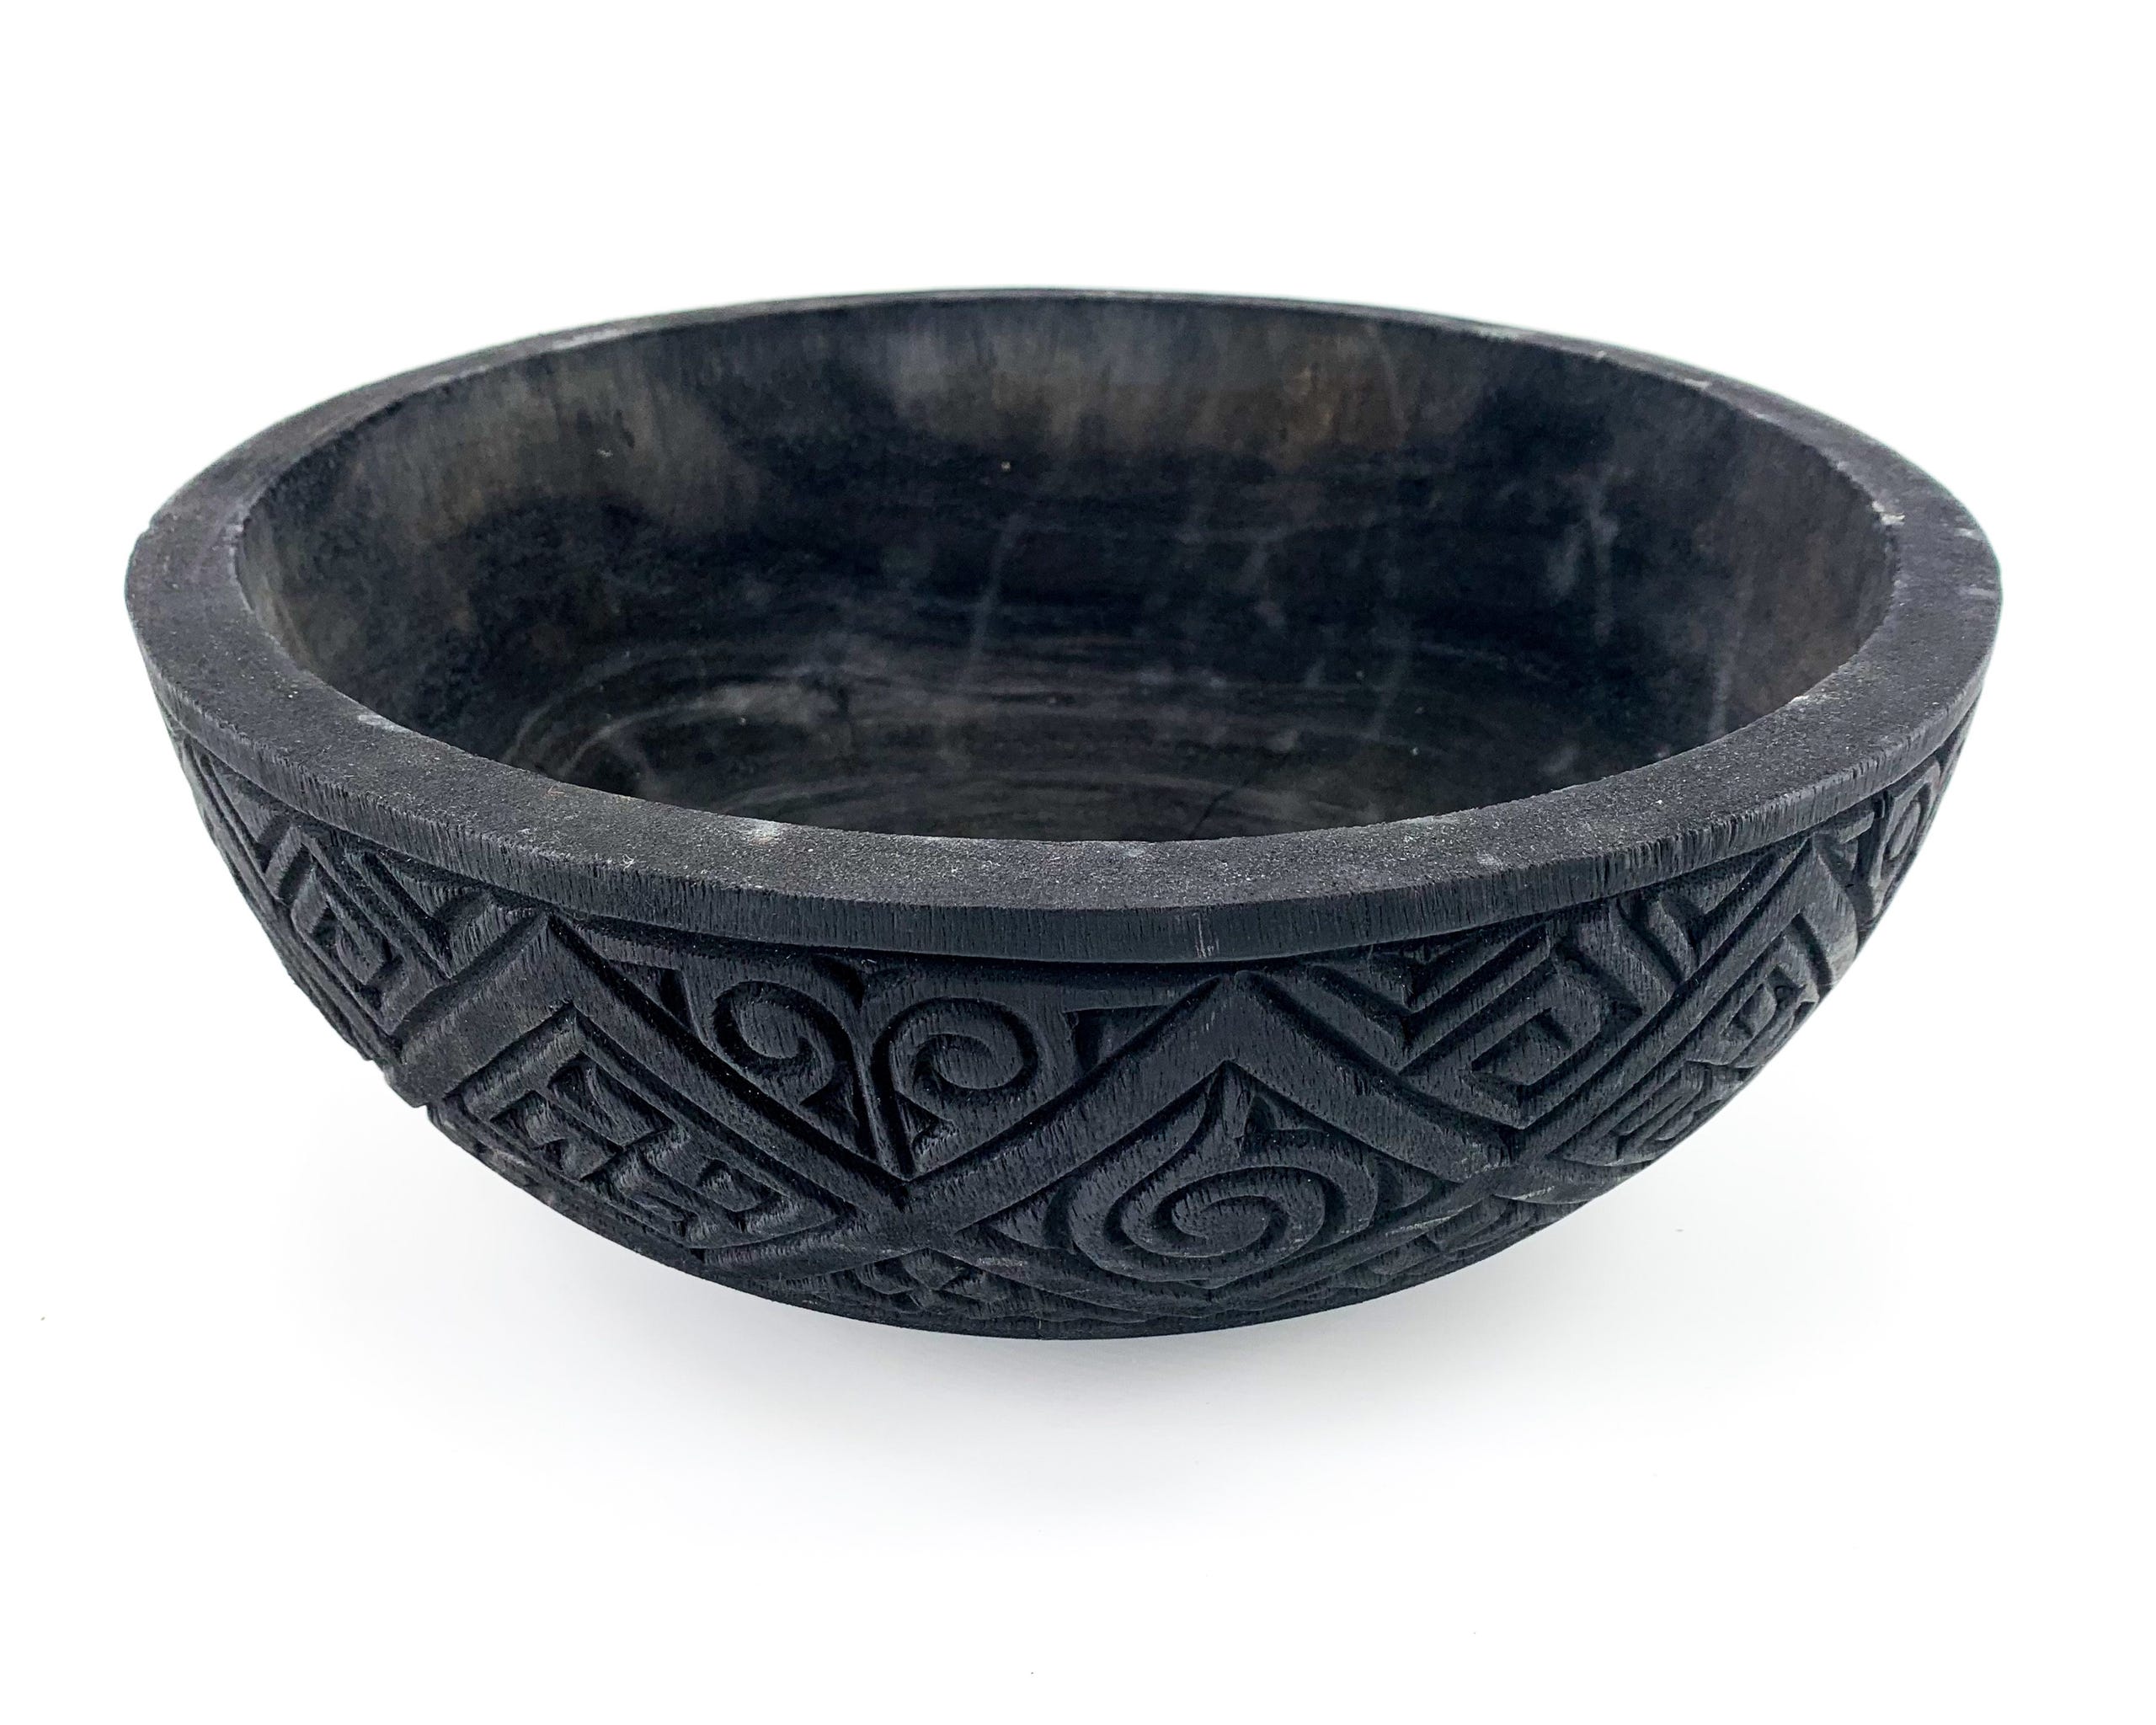 Wooden bowl with carvings